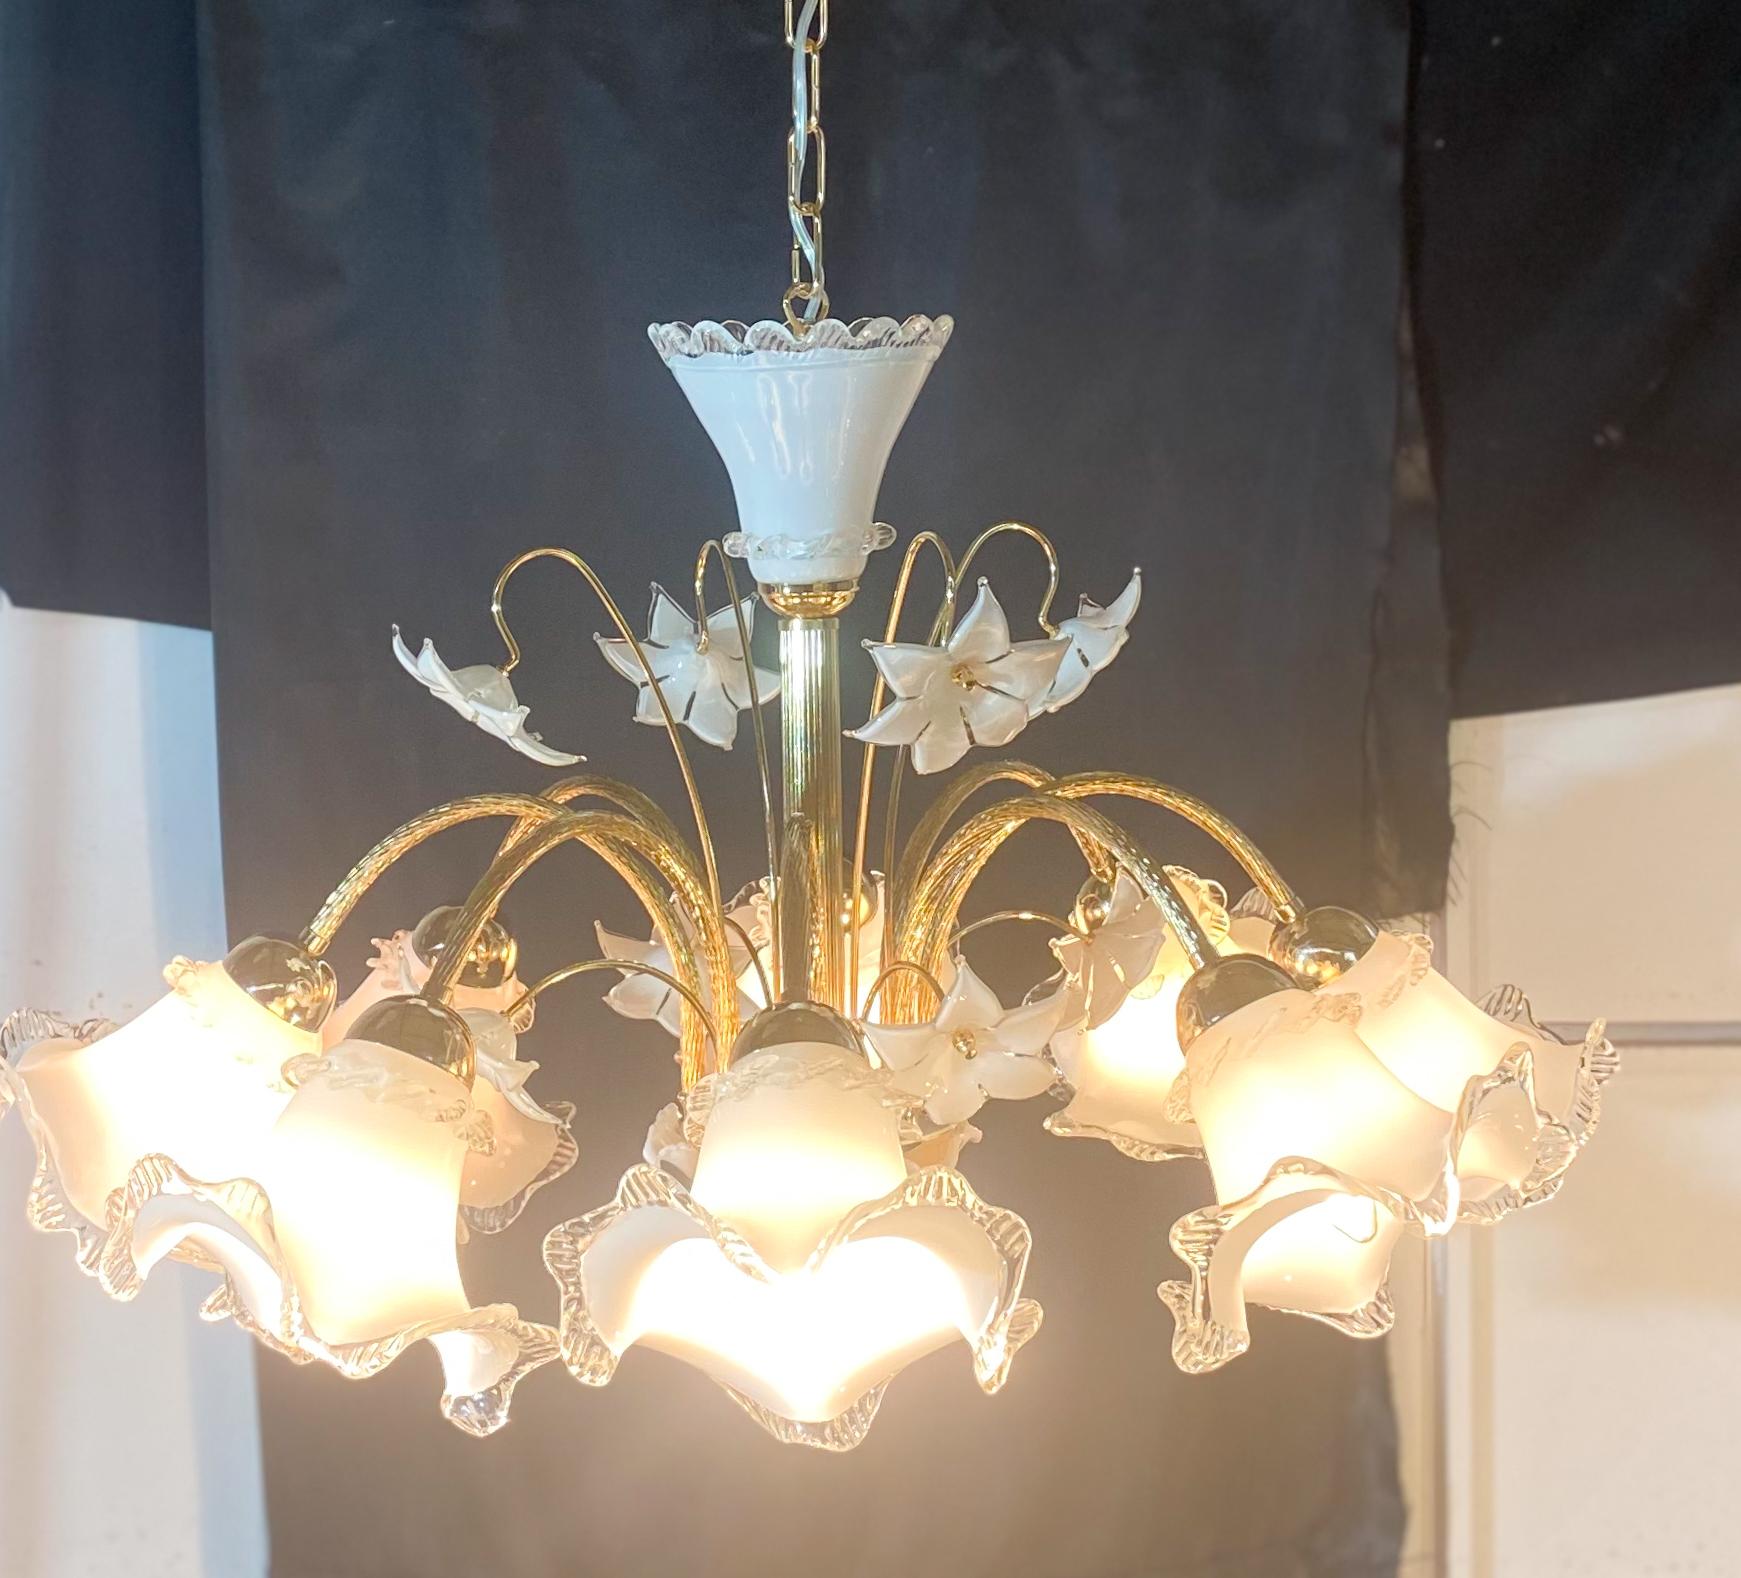 Majestic Murano chandelier with 8 arm lights. Example of Venetian blown glass technique.The chandelier consists of 8 cups and decorative flowers.The structure has been perfectly restored with the golden bath technique, the electrical system has also